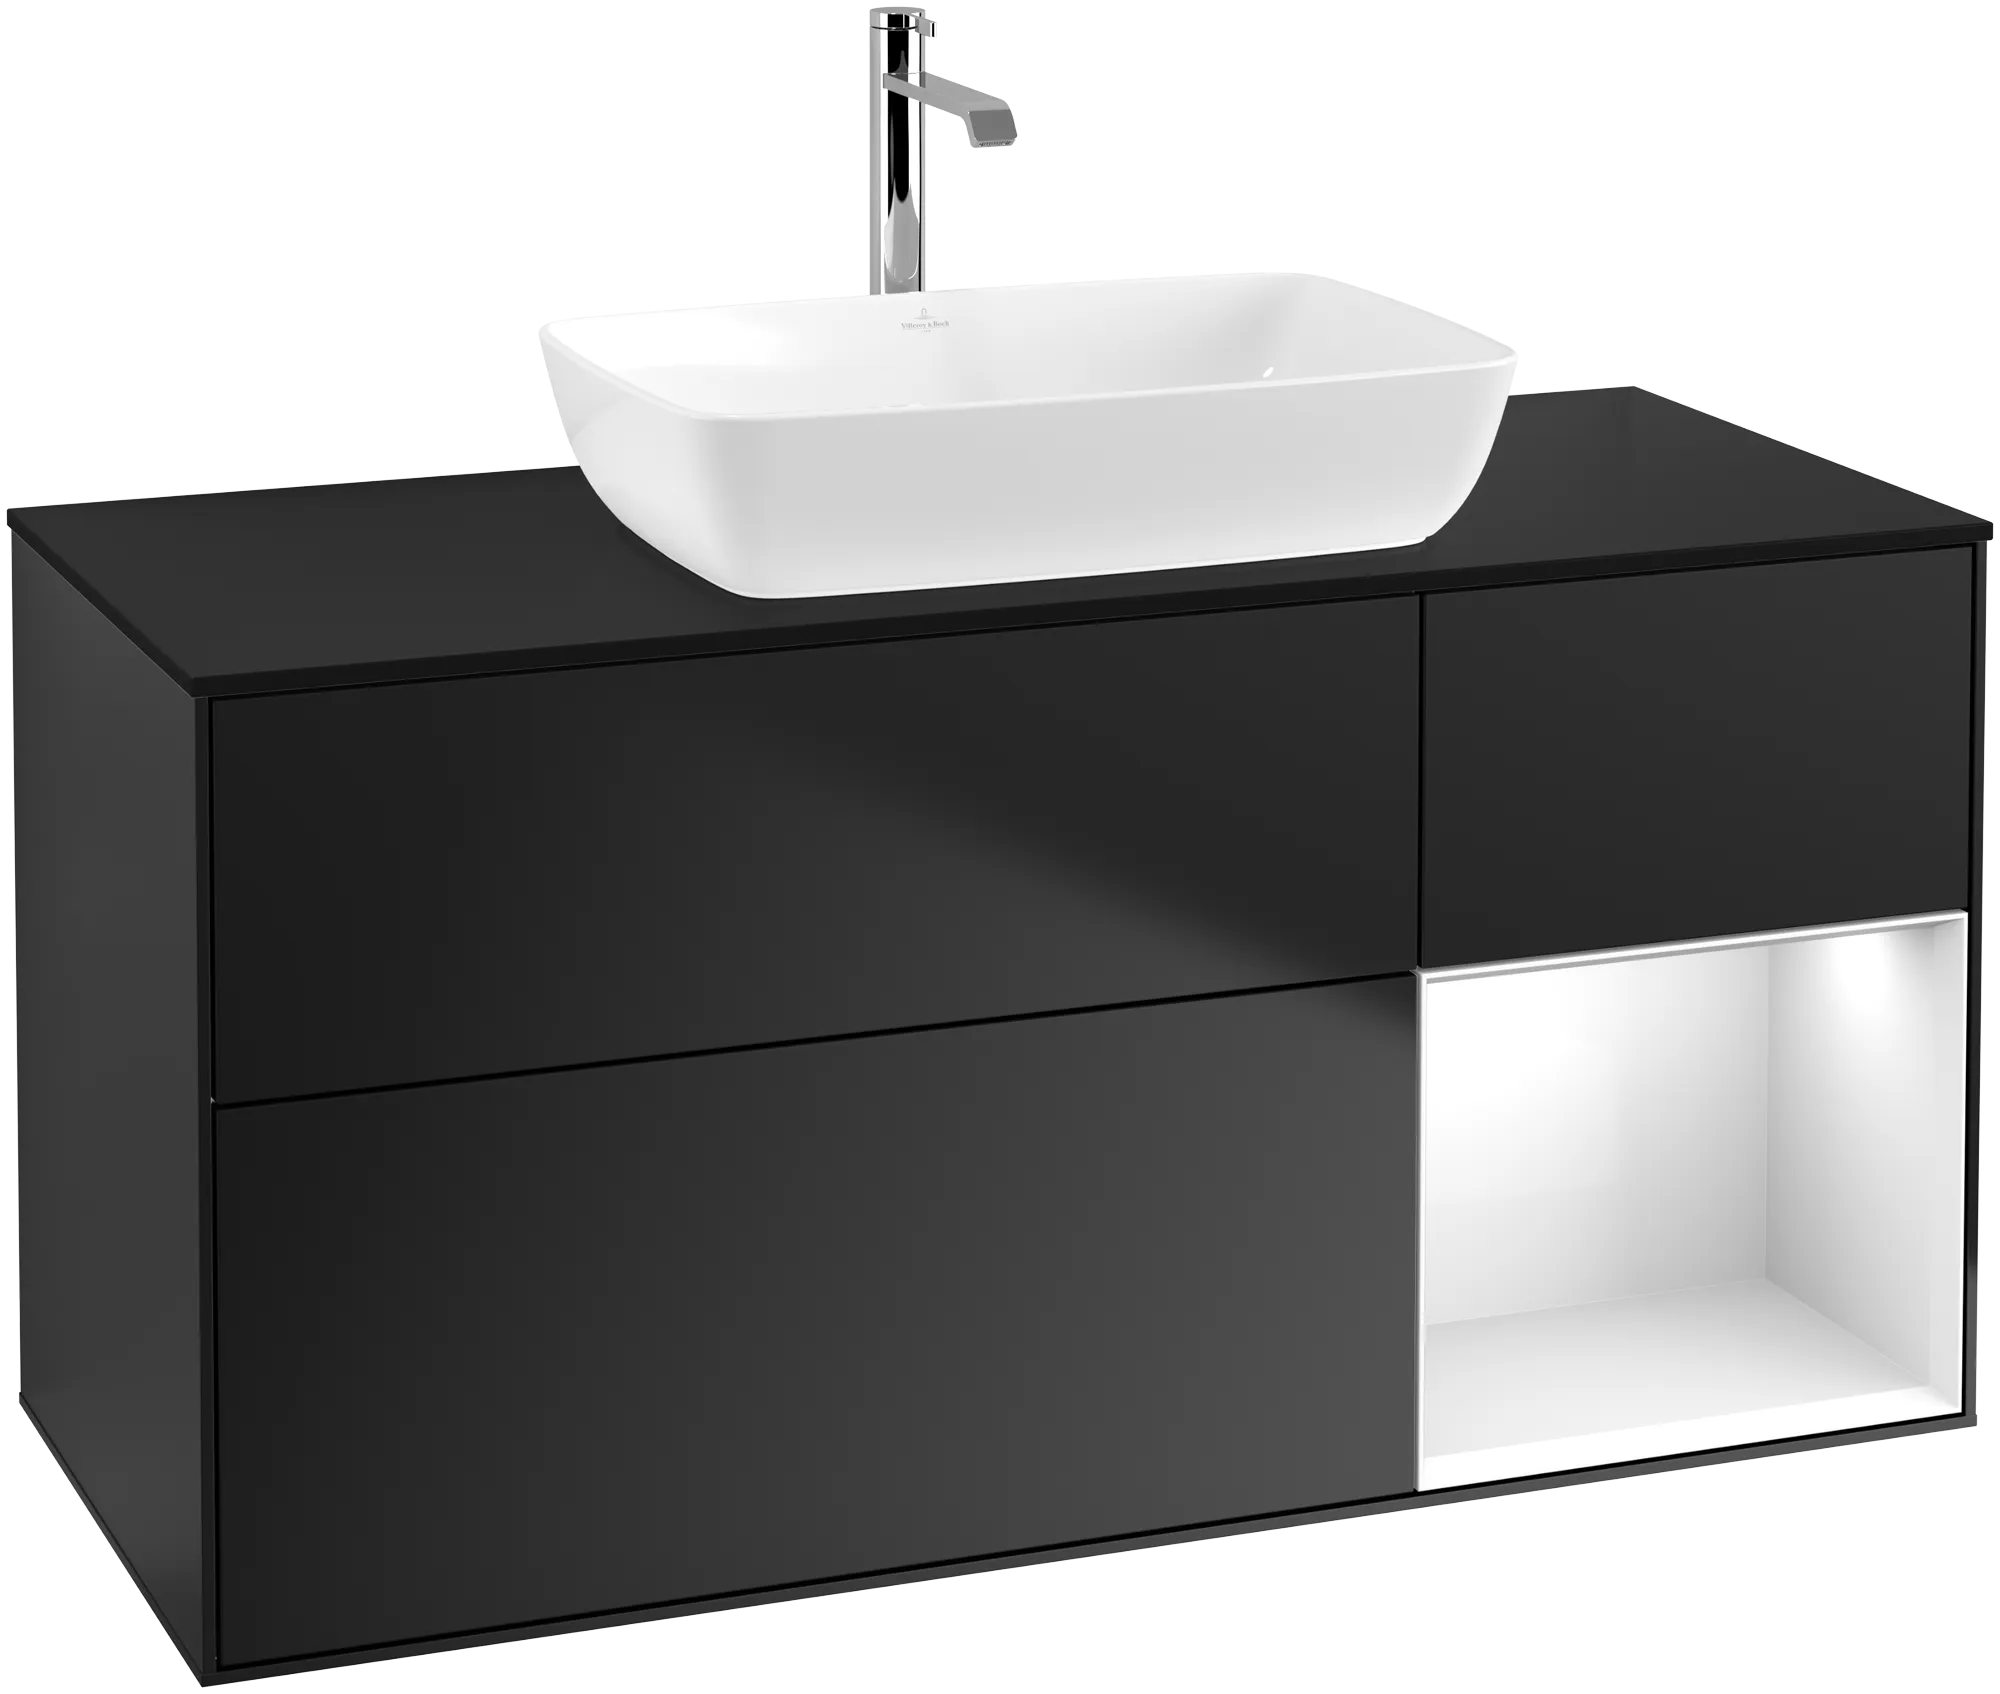 VILLEROY BOCH Finion Vanity unit, with lighting, 3 pull-out compartments, 1200 x 603 x 501 mm, Black Matt Lacquer / Glossy White Lacquer / Glass Black Matt #G832GFPD resmi